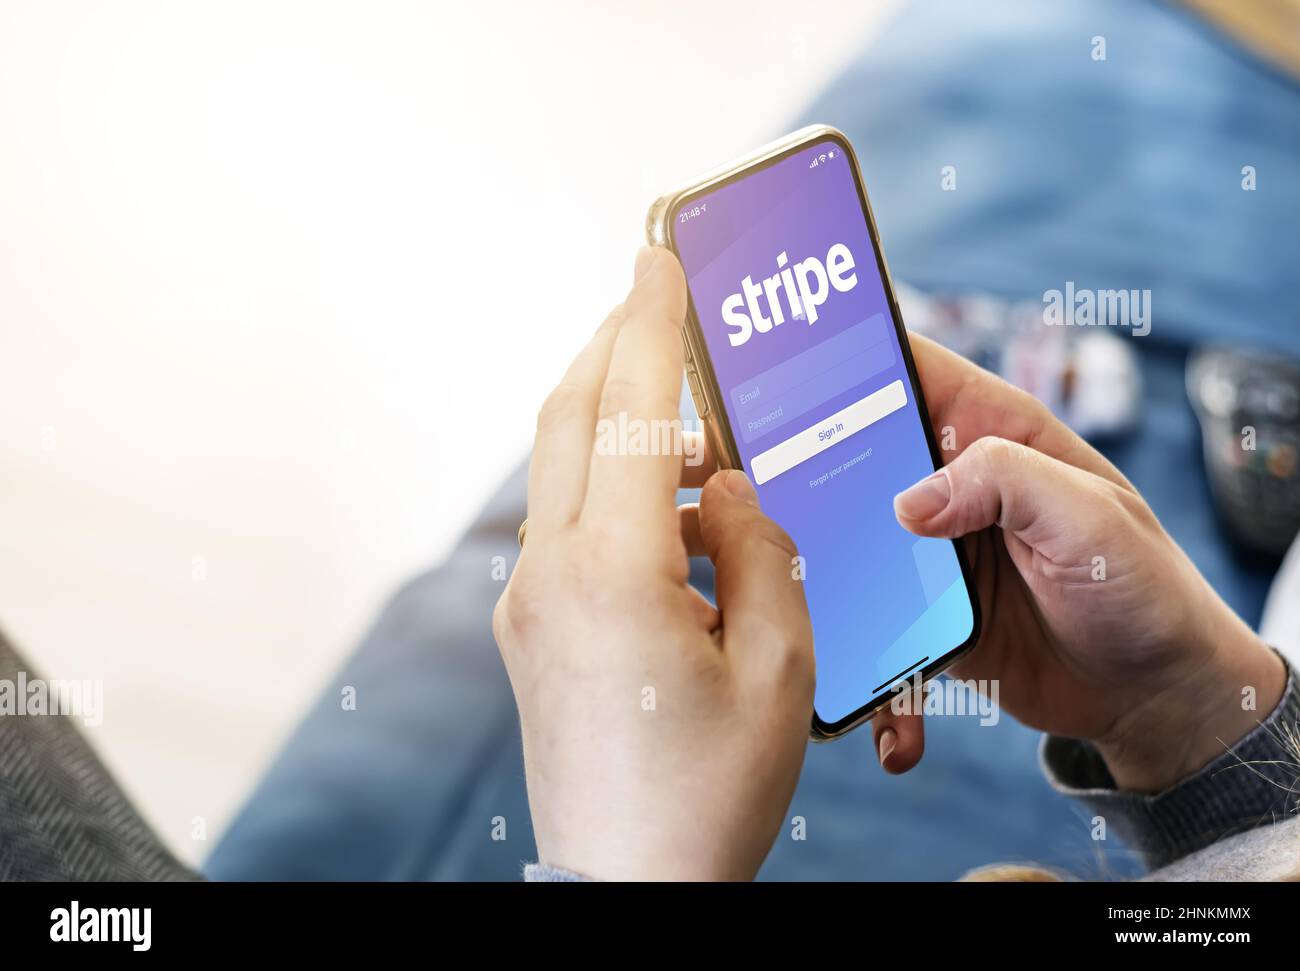 Woman holding a smart phone with Stripe app on the screen. Stripe is an American financial services company. Business and finance Stock Photo